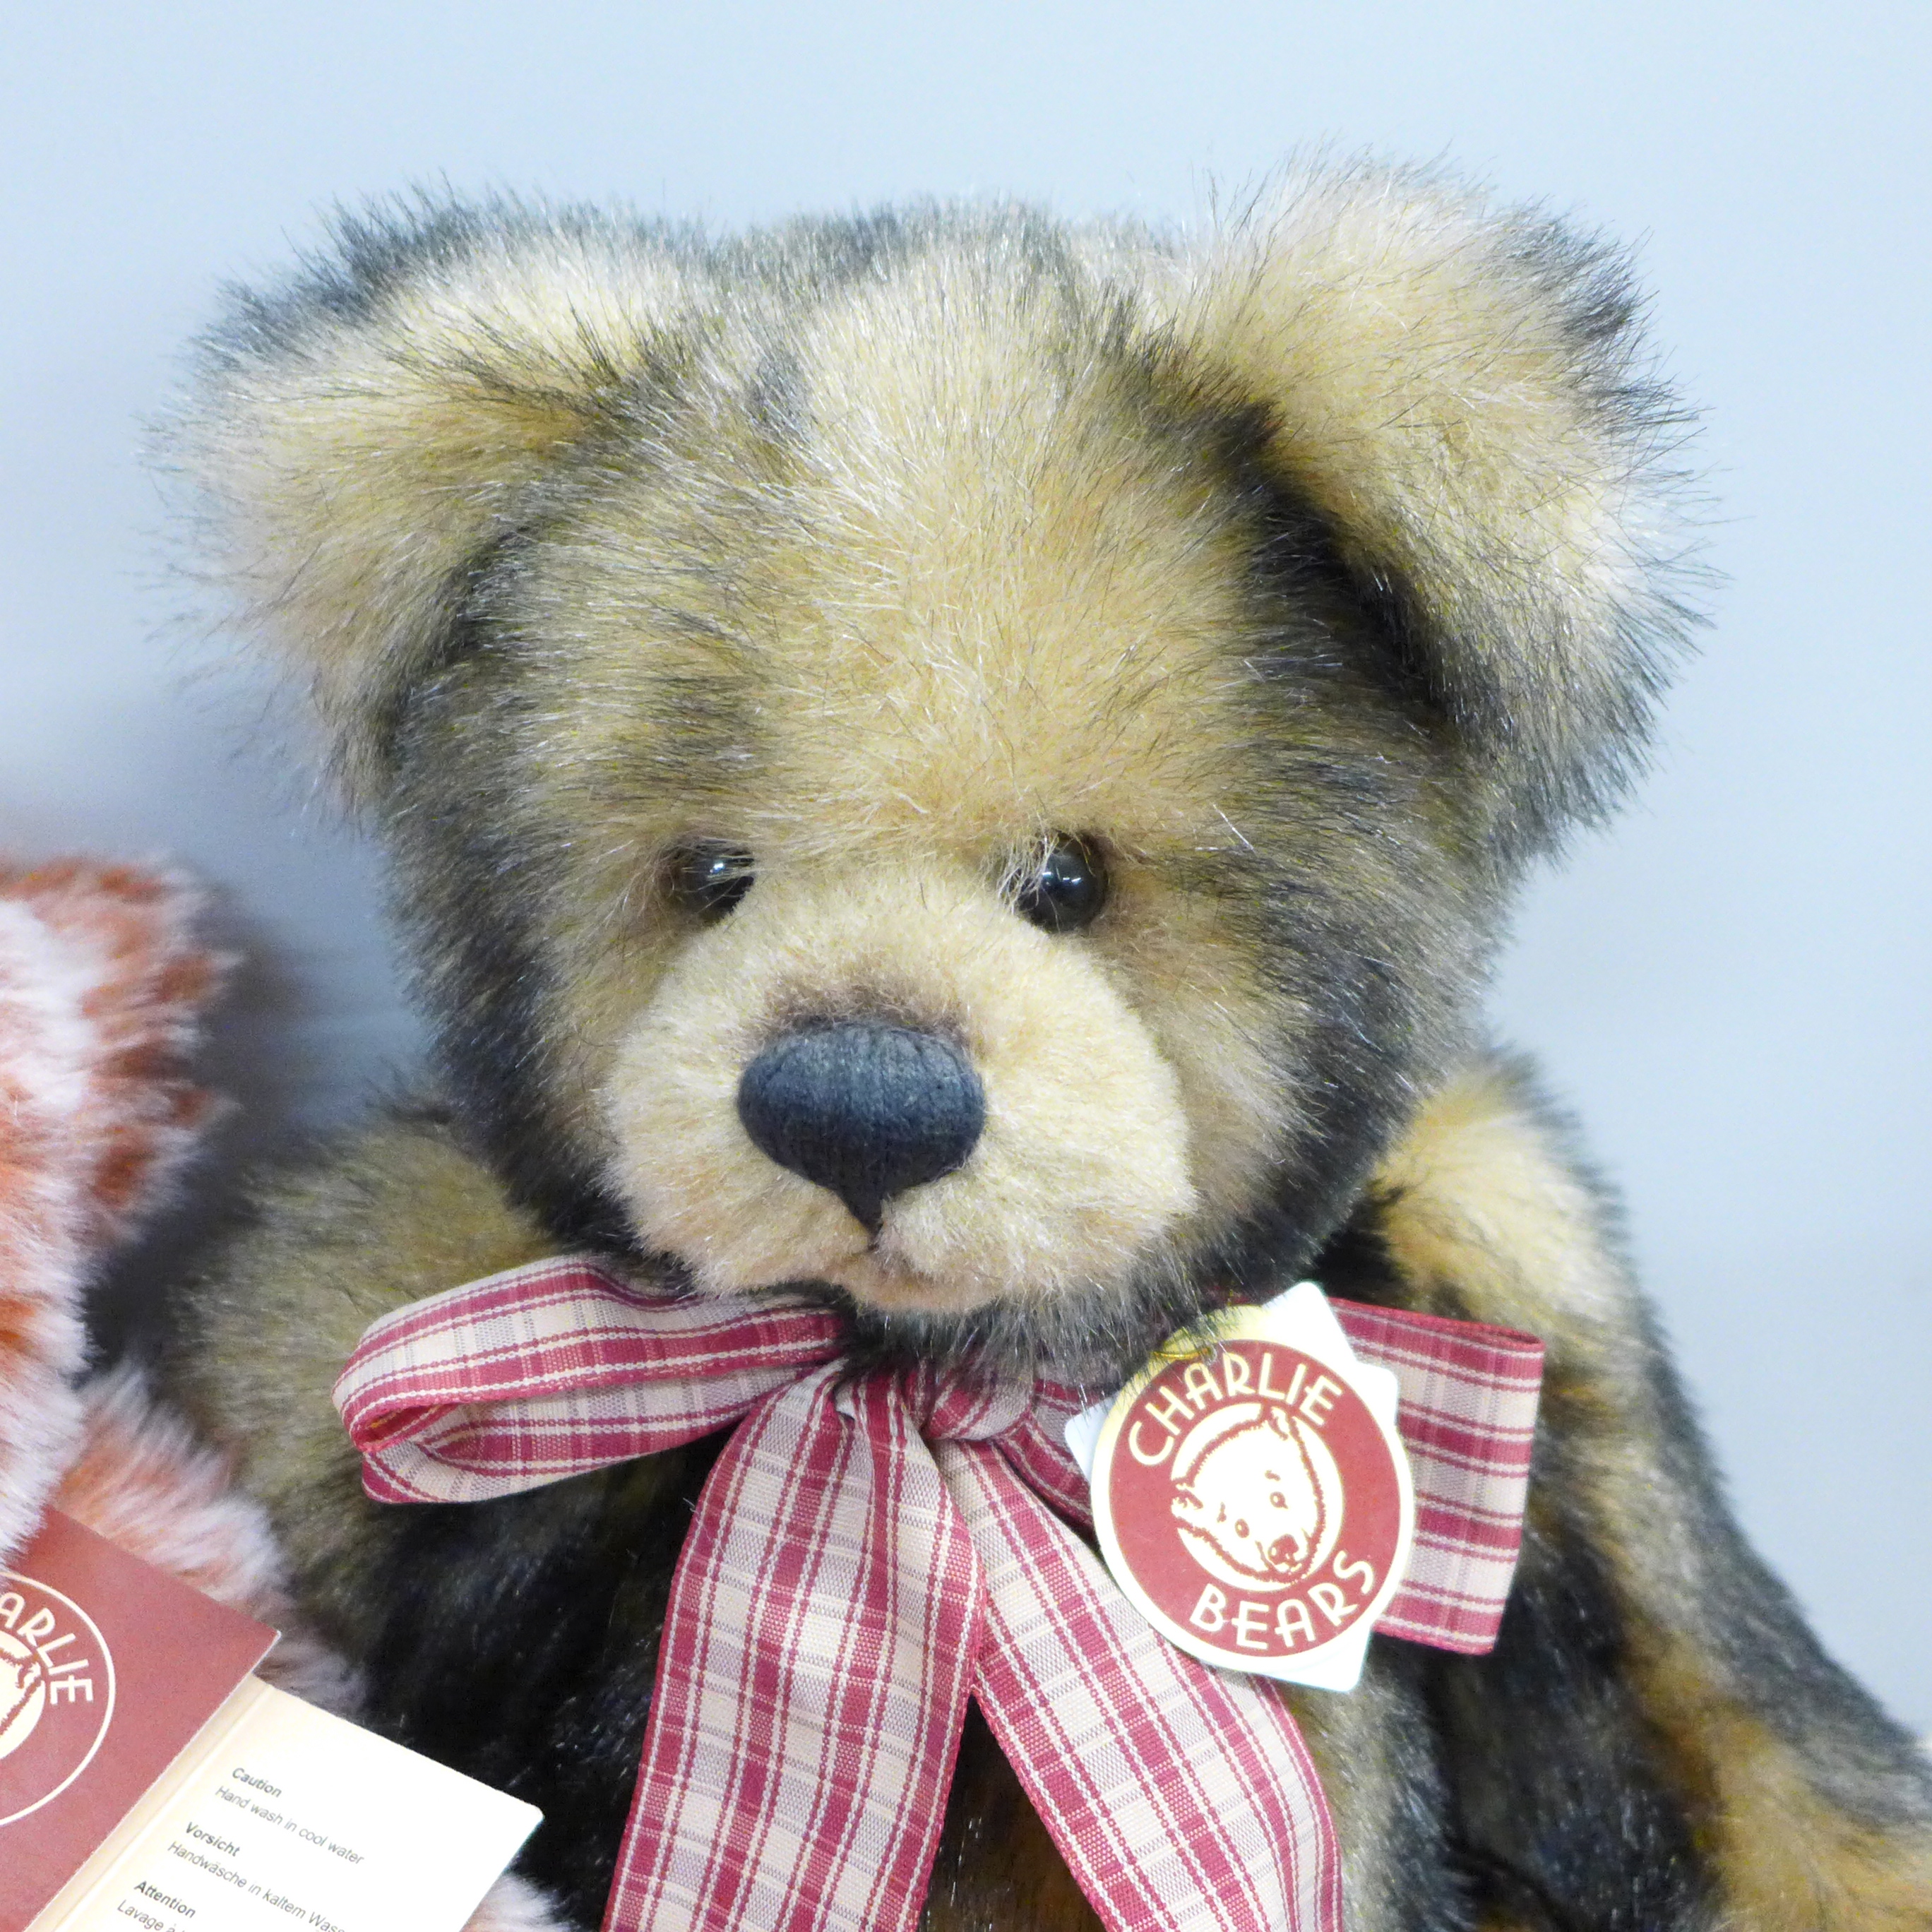 Two Charlie Bears, Corey and Edith with dust bag - Image 2 of 6